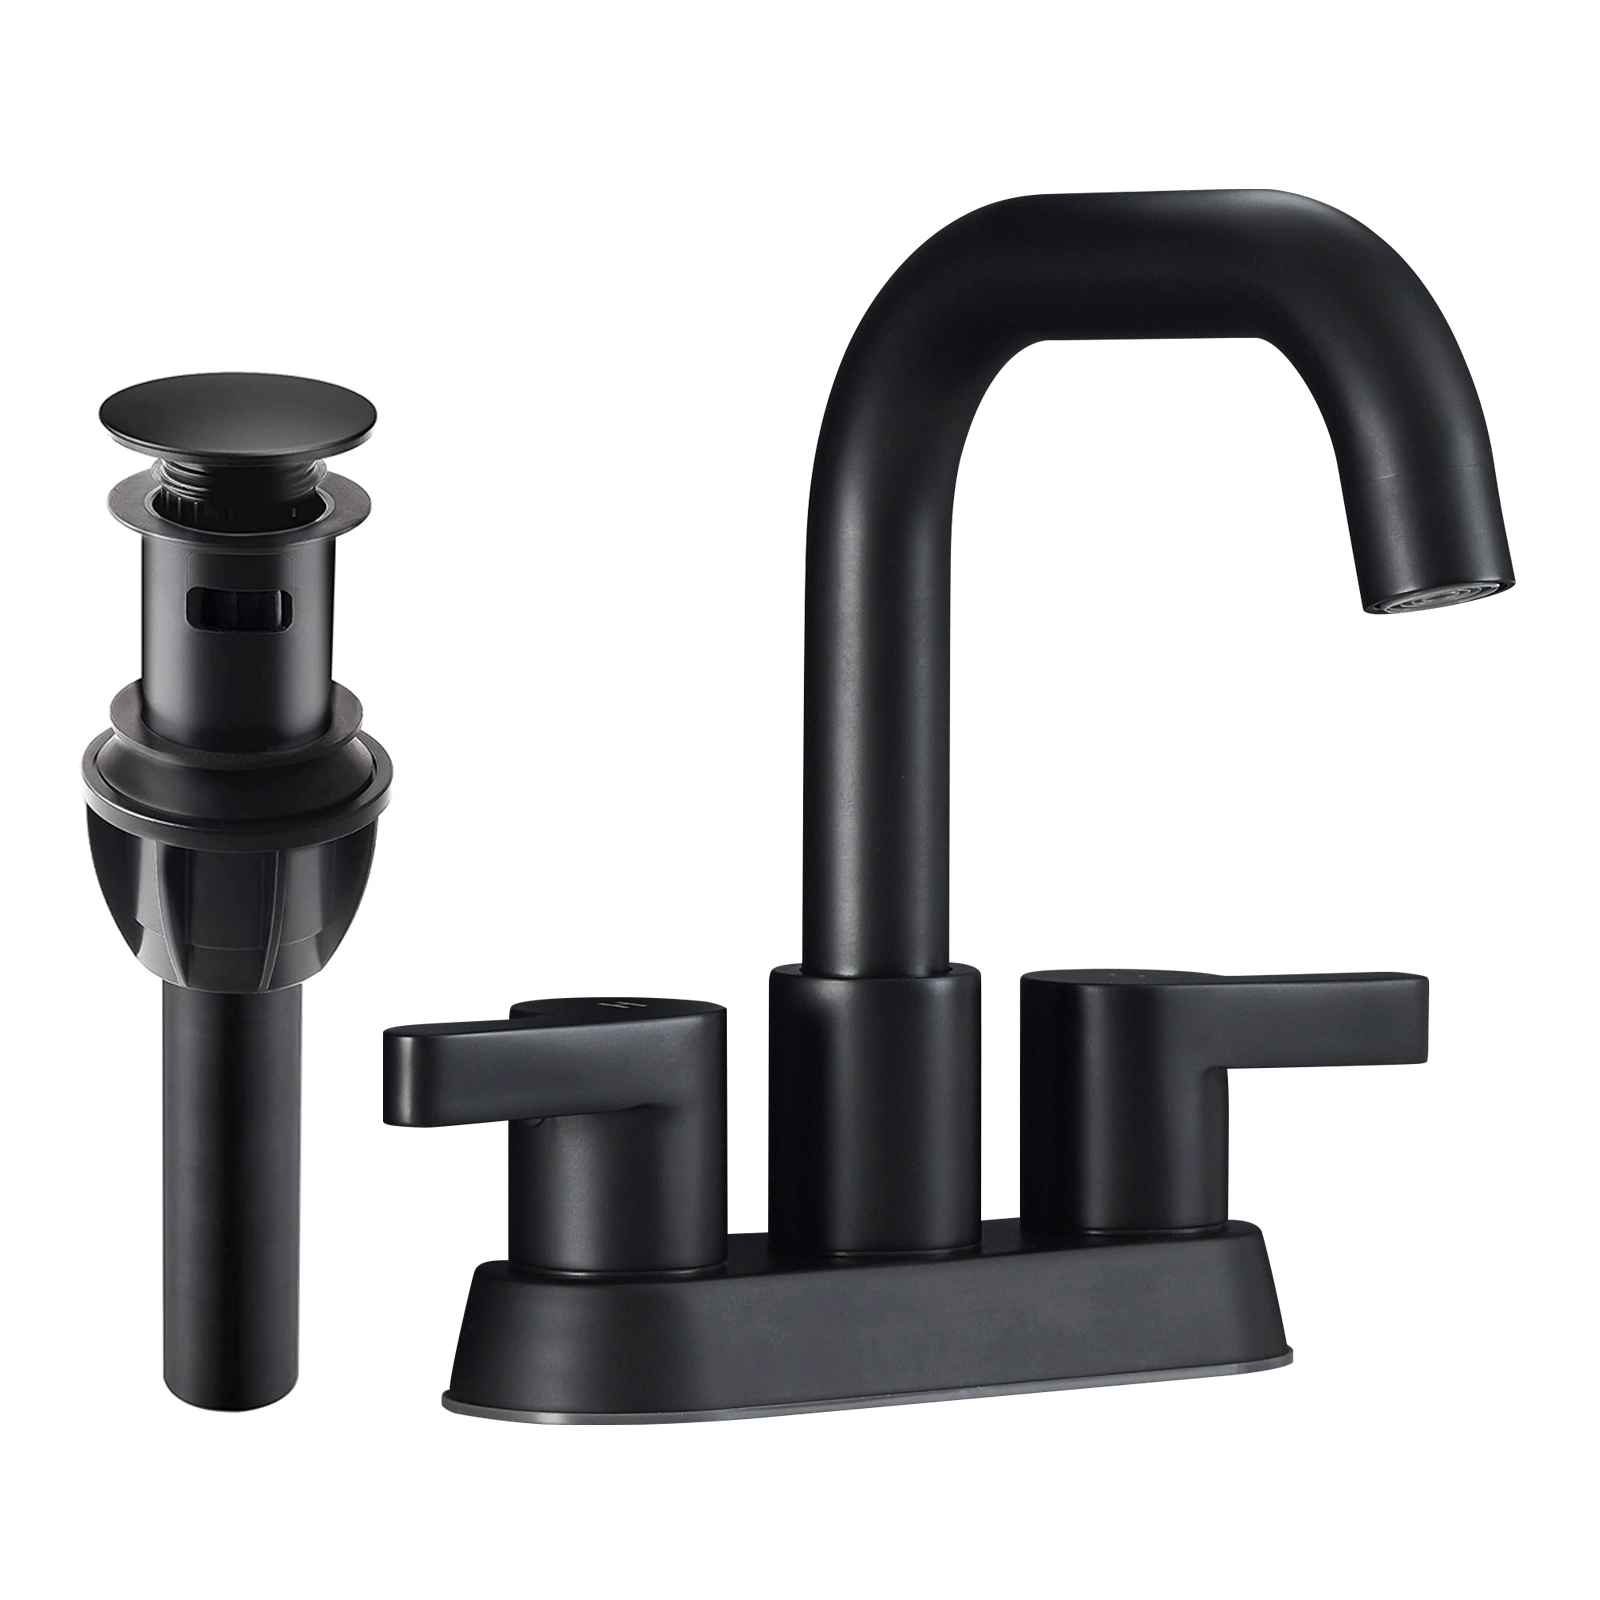 How to clean matte black faucets?